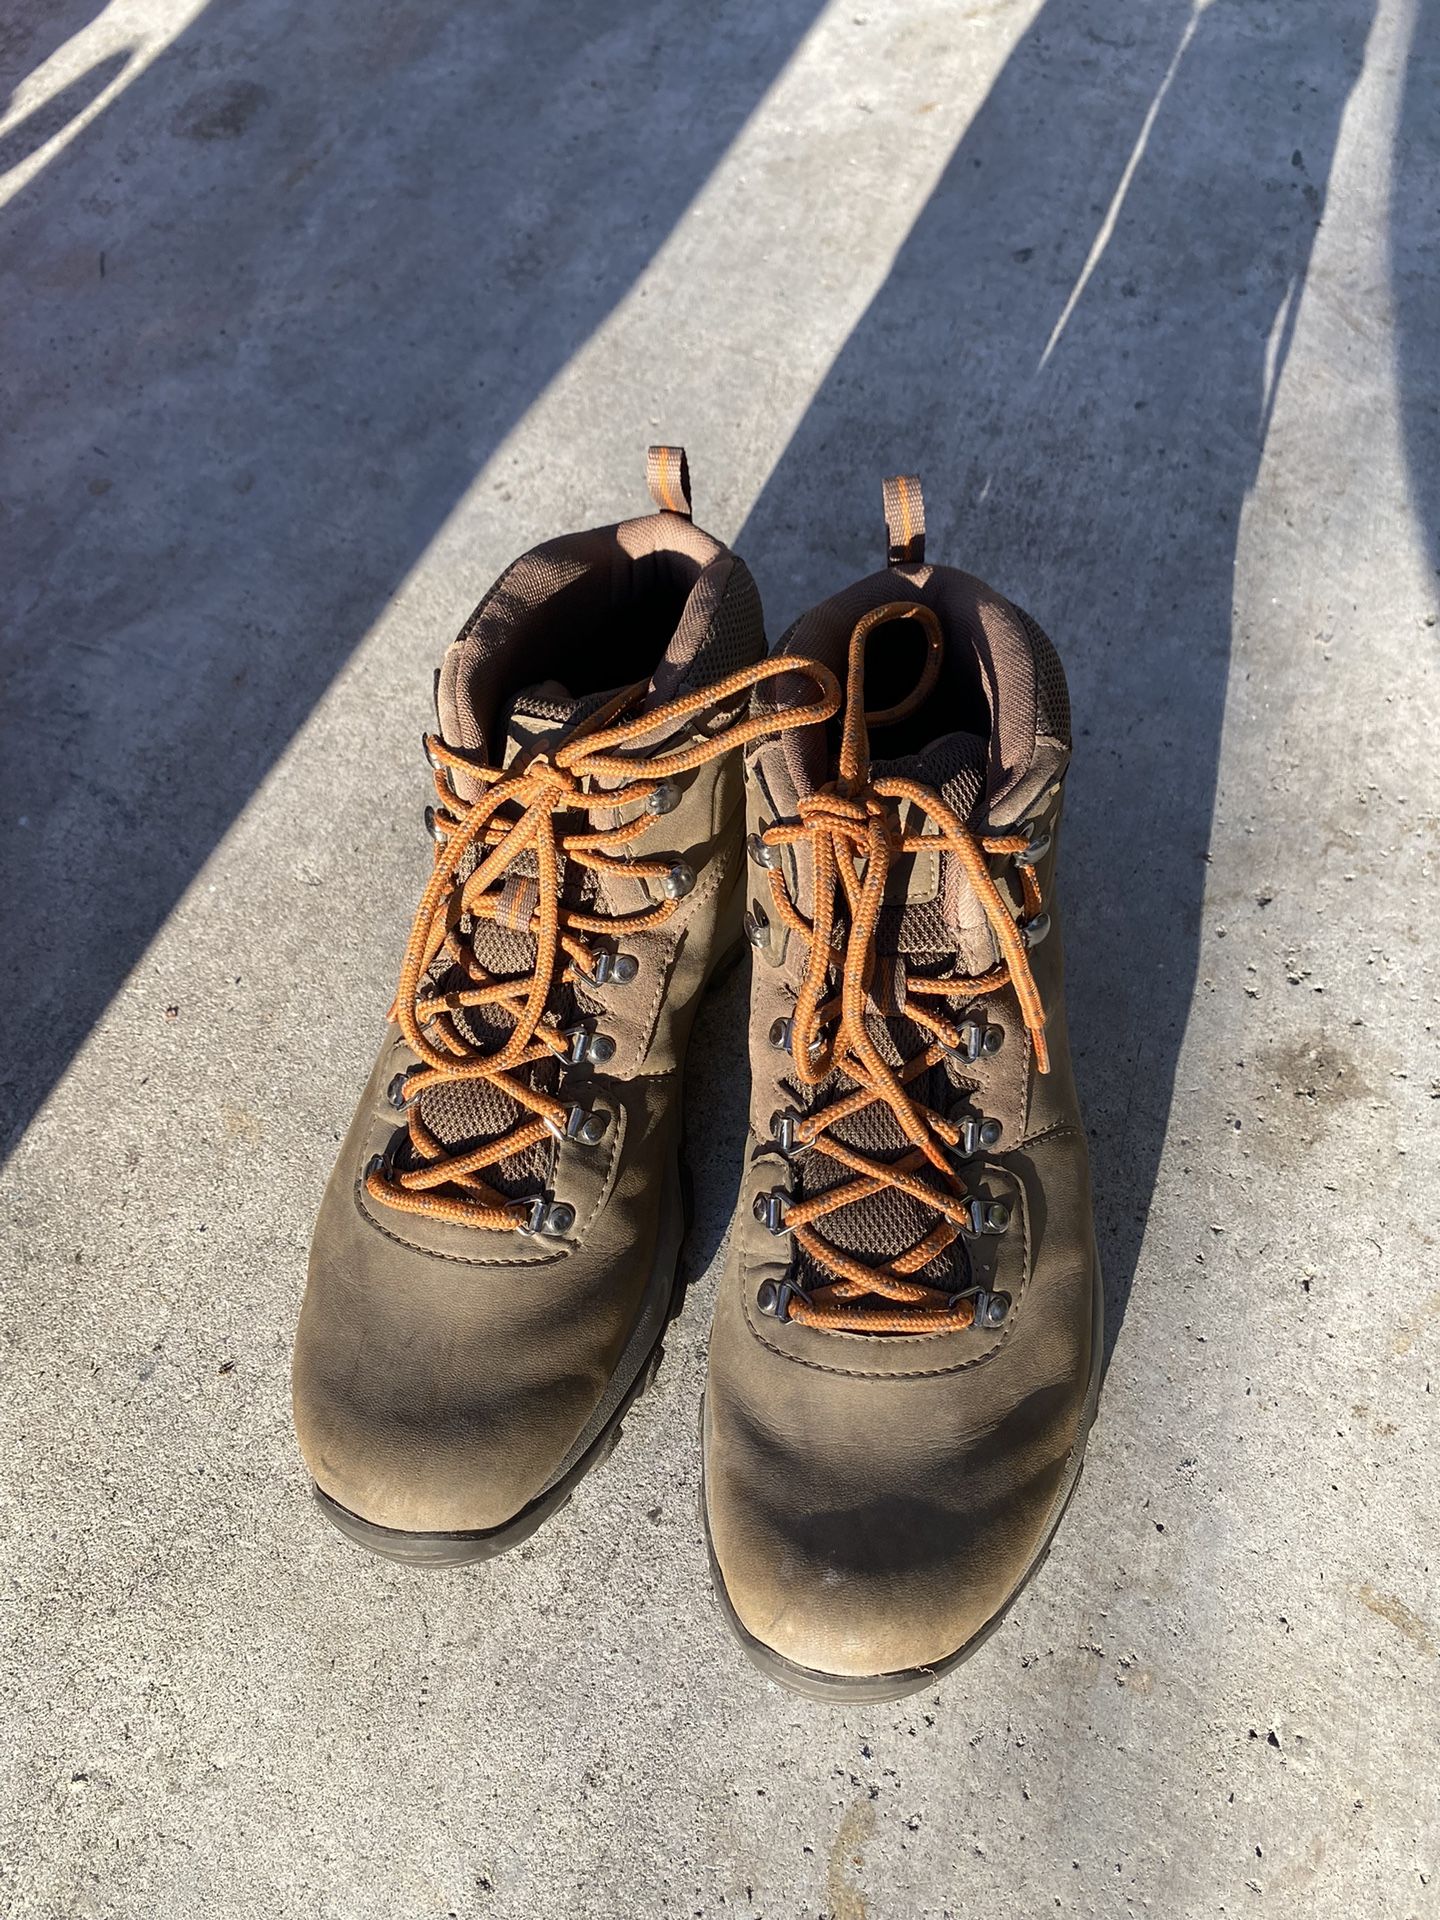 Columbia Hiking Boots Size 13